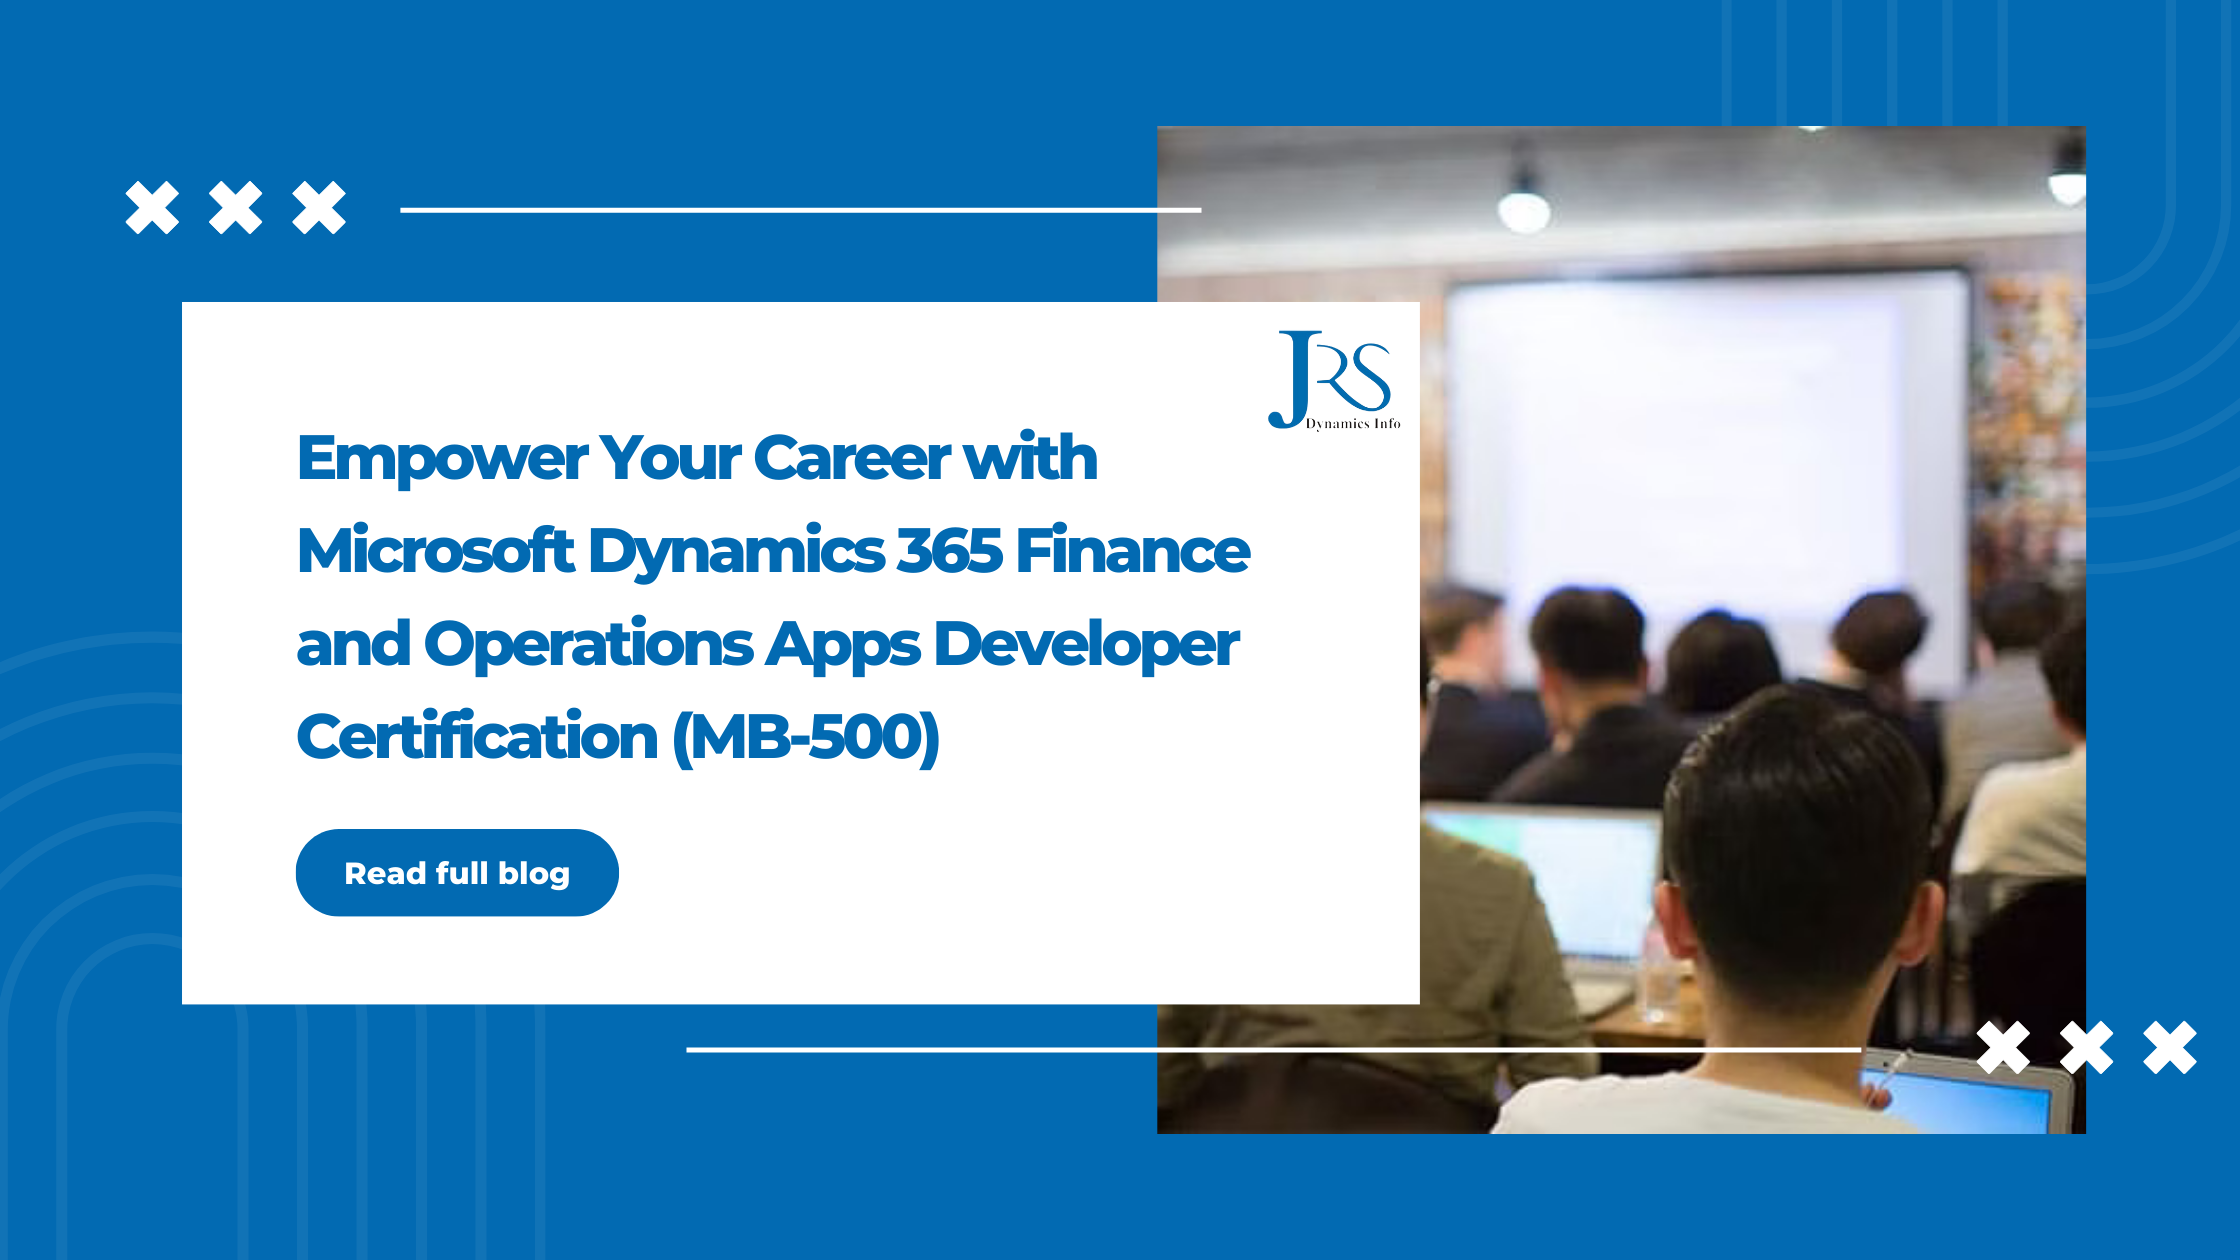 Empower Your Career with Microsoft Dynamics 365 Finance and Operations Apps Developer Certification (MB-500)